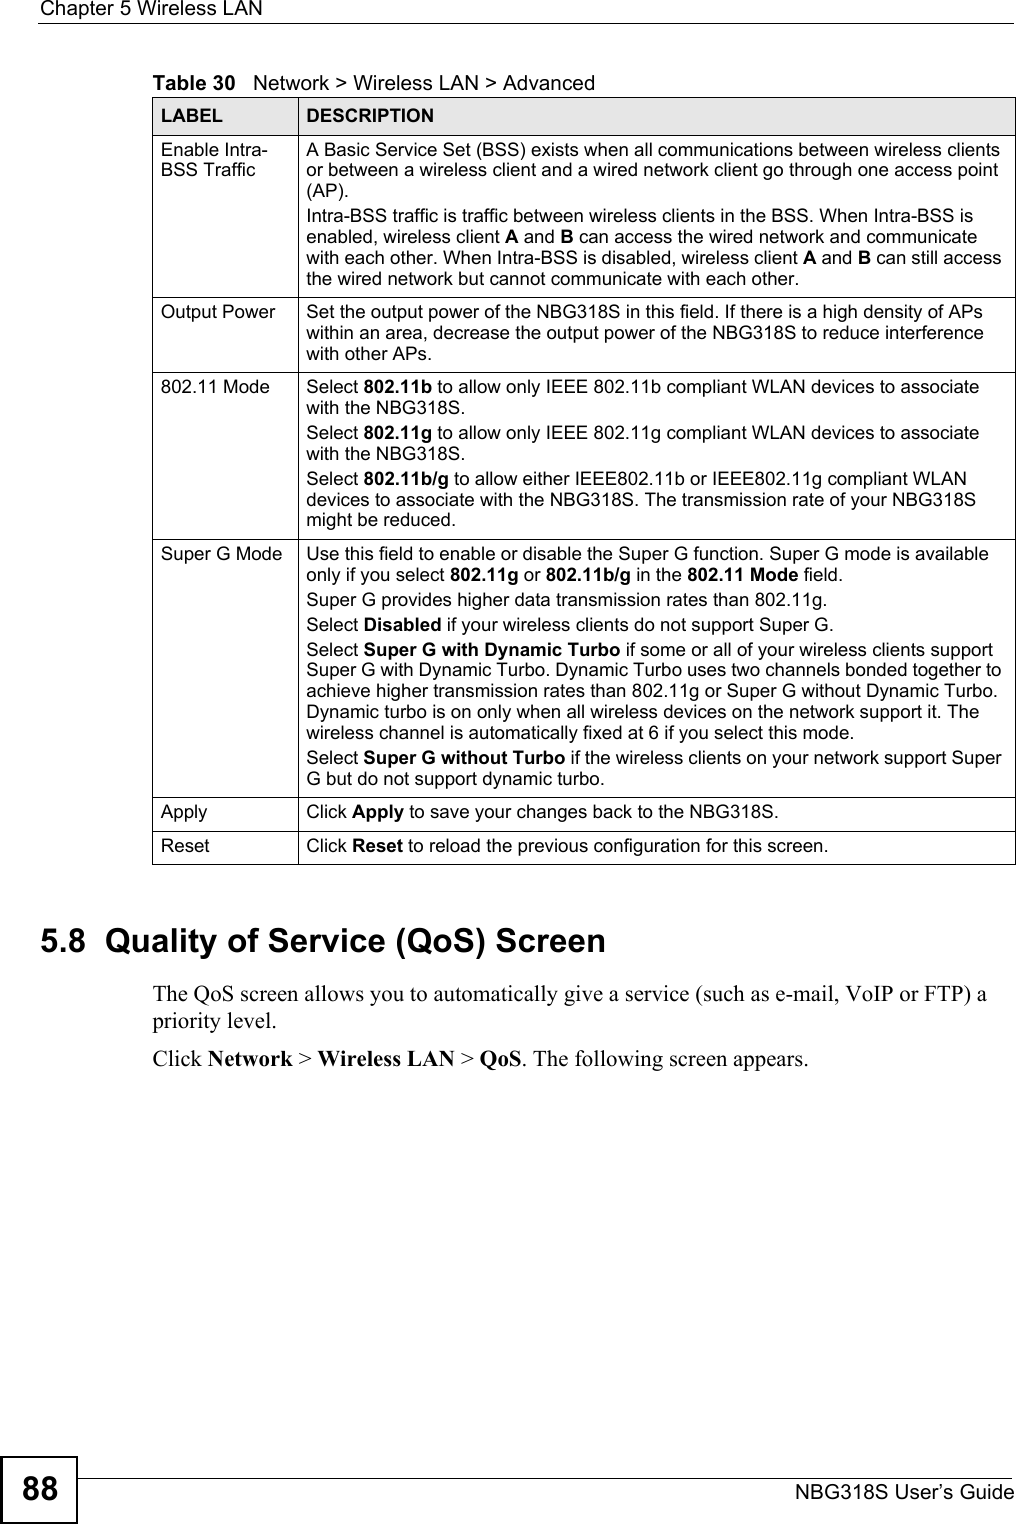 Chapter 5 Wireless LANNBG318S User’s Guide885.8  Quality of Service (QoS) ScreenThe QoS screen allows you to automatically give a service (such as e-mail, VoIP or FTP) a priority level.Click Network &gt; Wireless LAN &gt; QoS. The following screen appears.Enable Intra-BSS TrafficA Basic Service Set (BSS) exists when all communications between wireless clients or between a wireless client and a wired network client go through one access point (AP). Intra-BSS traffic is traffic between wireless clients in the BSS. When Intra-BSS is enabled, wireless client A and B can access the wired network and communicate with each other. When Intra-BSS is disabled, wireless client A and B can still access the wired network but cannot communicate with each other.Output Power  Set the output power of the NBG318S in this field. If there is a high density of APs within an area, decrease the output power of the NBG318S to reduce interference with other APs.802.11 Mode Select 802.11b to allow only IEEE 802.11b compliant WLAN devices to associate with the NBG318S.Select 802.11g to allow only IEEE 802.11g compliant WLAN devices to associate with the NBG318S.Select 802.11b/g to allow either IEEE802.11b or IEEE802.11g compliant WLAN devices to associate with the NBG318S. The transmission rate of your NBG318S might be reduced. Super G Mode Use this field to enable or disable the Super G function. Super G mode is available only if you select 802.11g or 802.11b/g in the 802.11 Mode field.Super G provides higher data transmission rates than 802.11g. Select Disabled if your wireless clients do not support Super G.Select Super G with Dynamic Turbo if some or all of your wireless clients support Super G with Dynamic Turbo. Dynamic Turbo uses two channels bonded together to achieve higher transmission rates than 802.11g or Super G without Dynamic Turbo. Dynamic turbo is on only when all wireless devices on the network support it. The wireless channel is automatically fixed at 6 if you select this mode.Select Super G without Turbo if the wireless clients on your network support Super G but do not support dynamic turbo.Apply Click Apply to save your changes back to the NBG318S.Reset Click Reset to reload the previous configuration for this screen.Table 30   Network &gt; Wireless LAN &gt; AdvancedLABEL DESCRIPTION